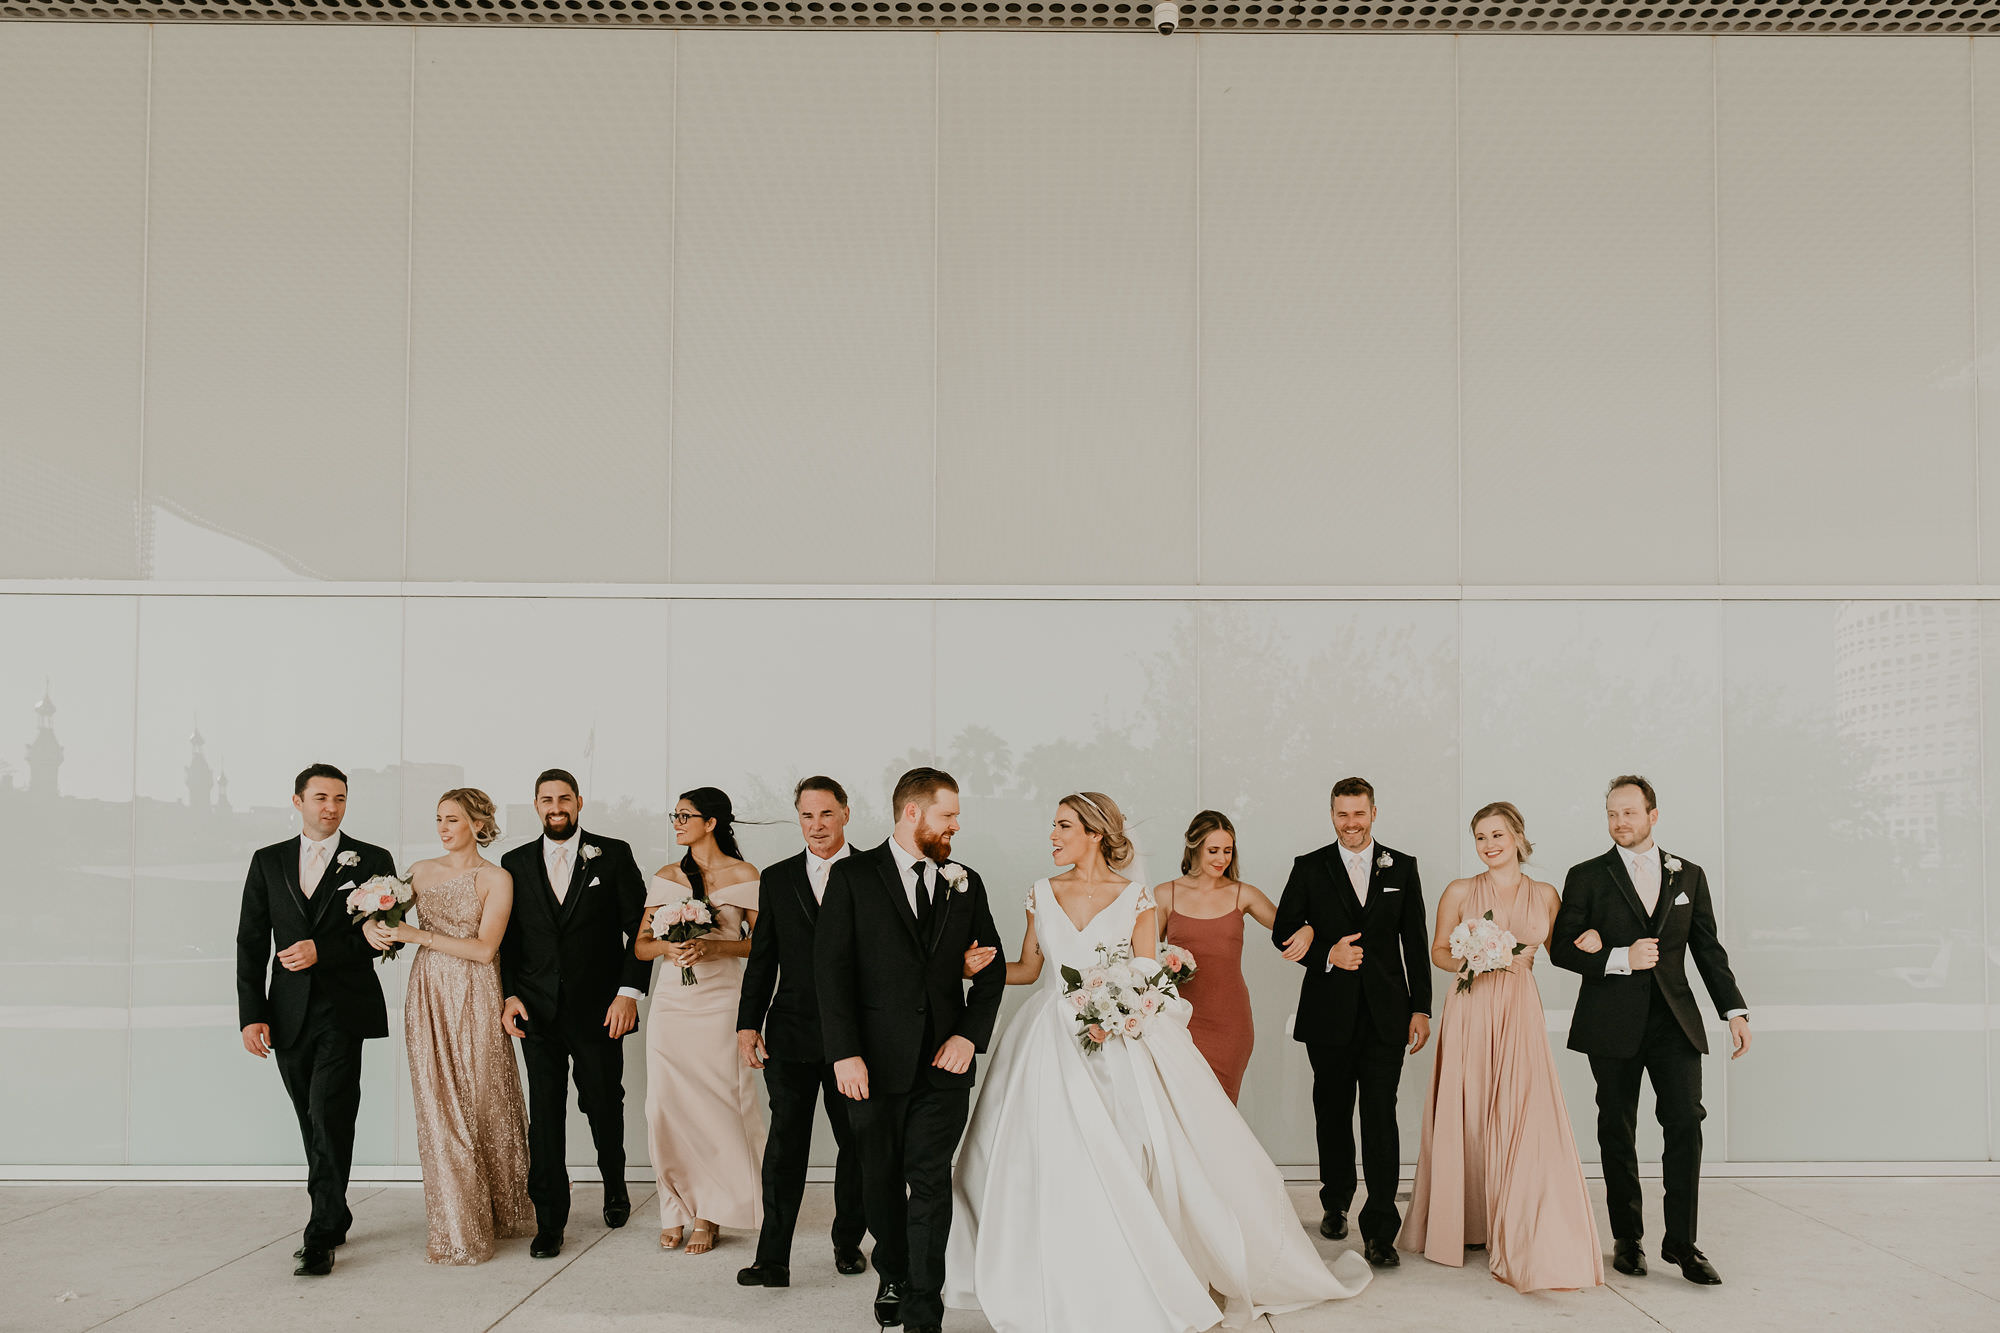 Outdoor Wedding Party Portrait | Nude Pink Blush Champagne Mismatch Bridesmaid Dresses | Neutral Wedding Bouquets with White and Ivory and Blush Champagne Roses | Low Back Ballgown Wedding Dress by Anomalie | Groom and Groomsmen in Classic Black Suit Tux